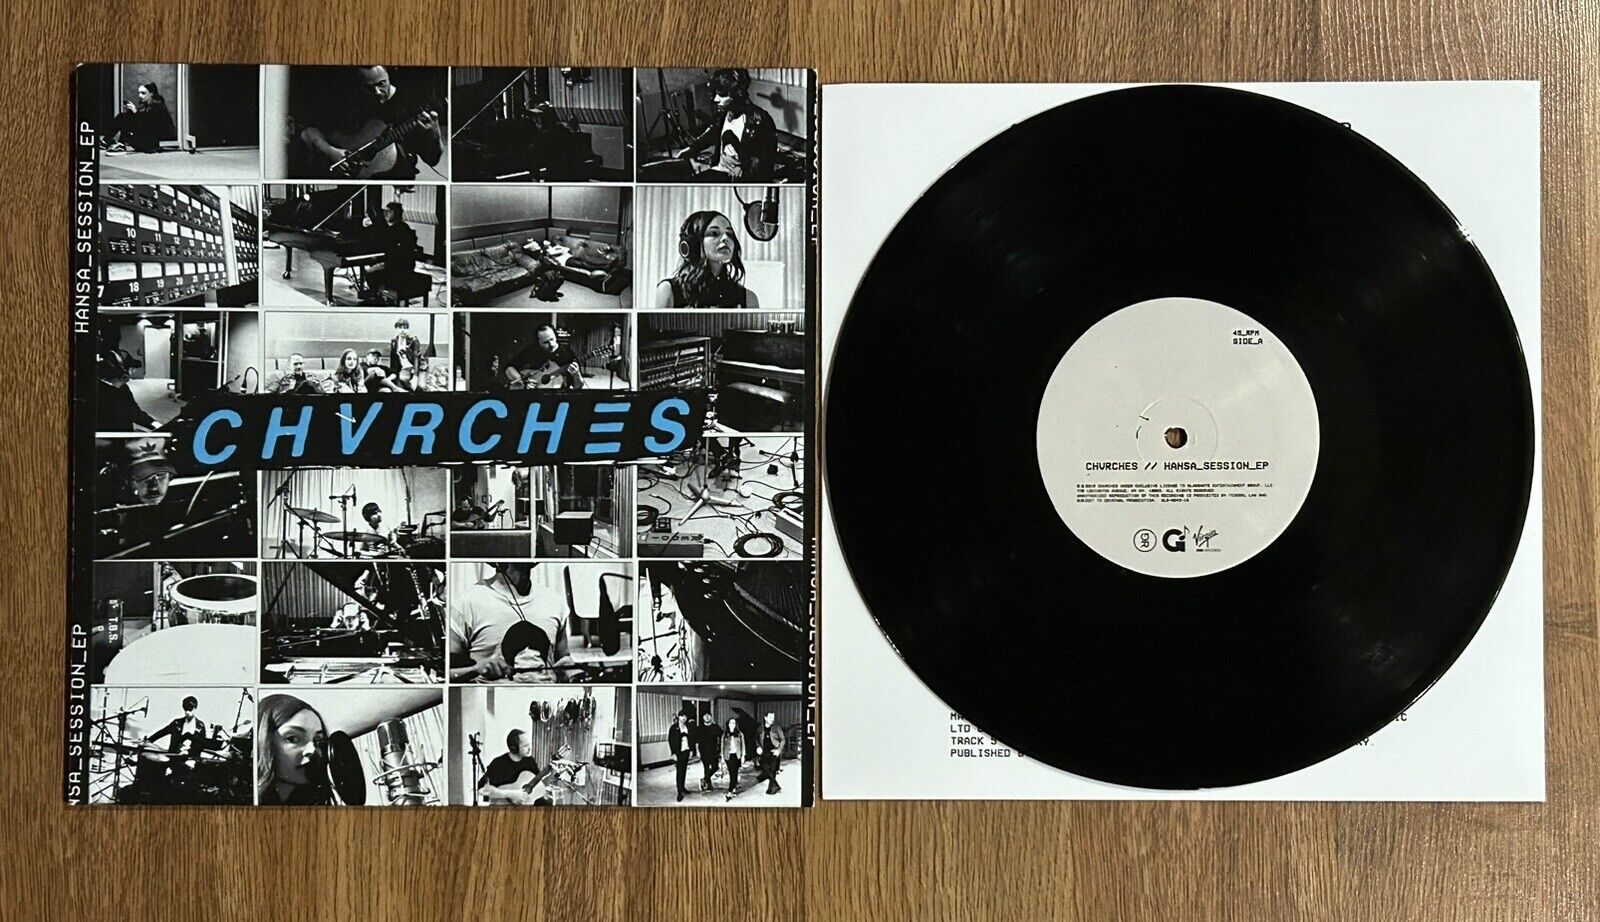 Chvrches - Hansa Session vinyl EP record RARE and Out of Print